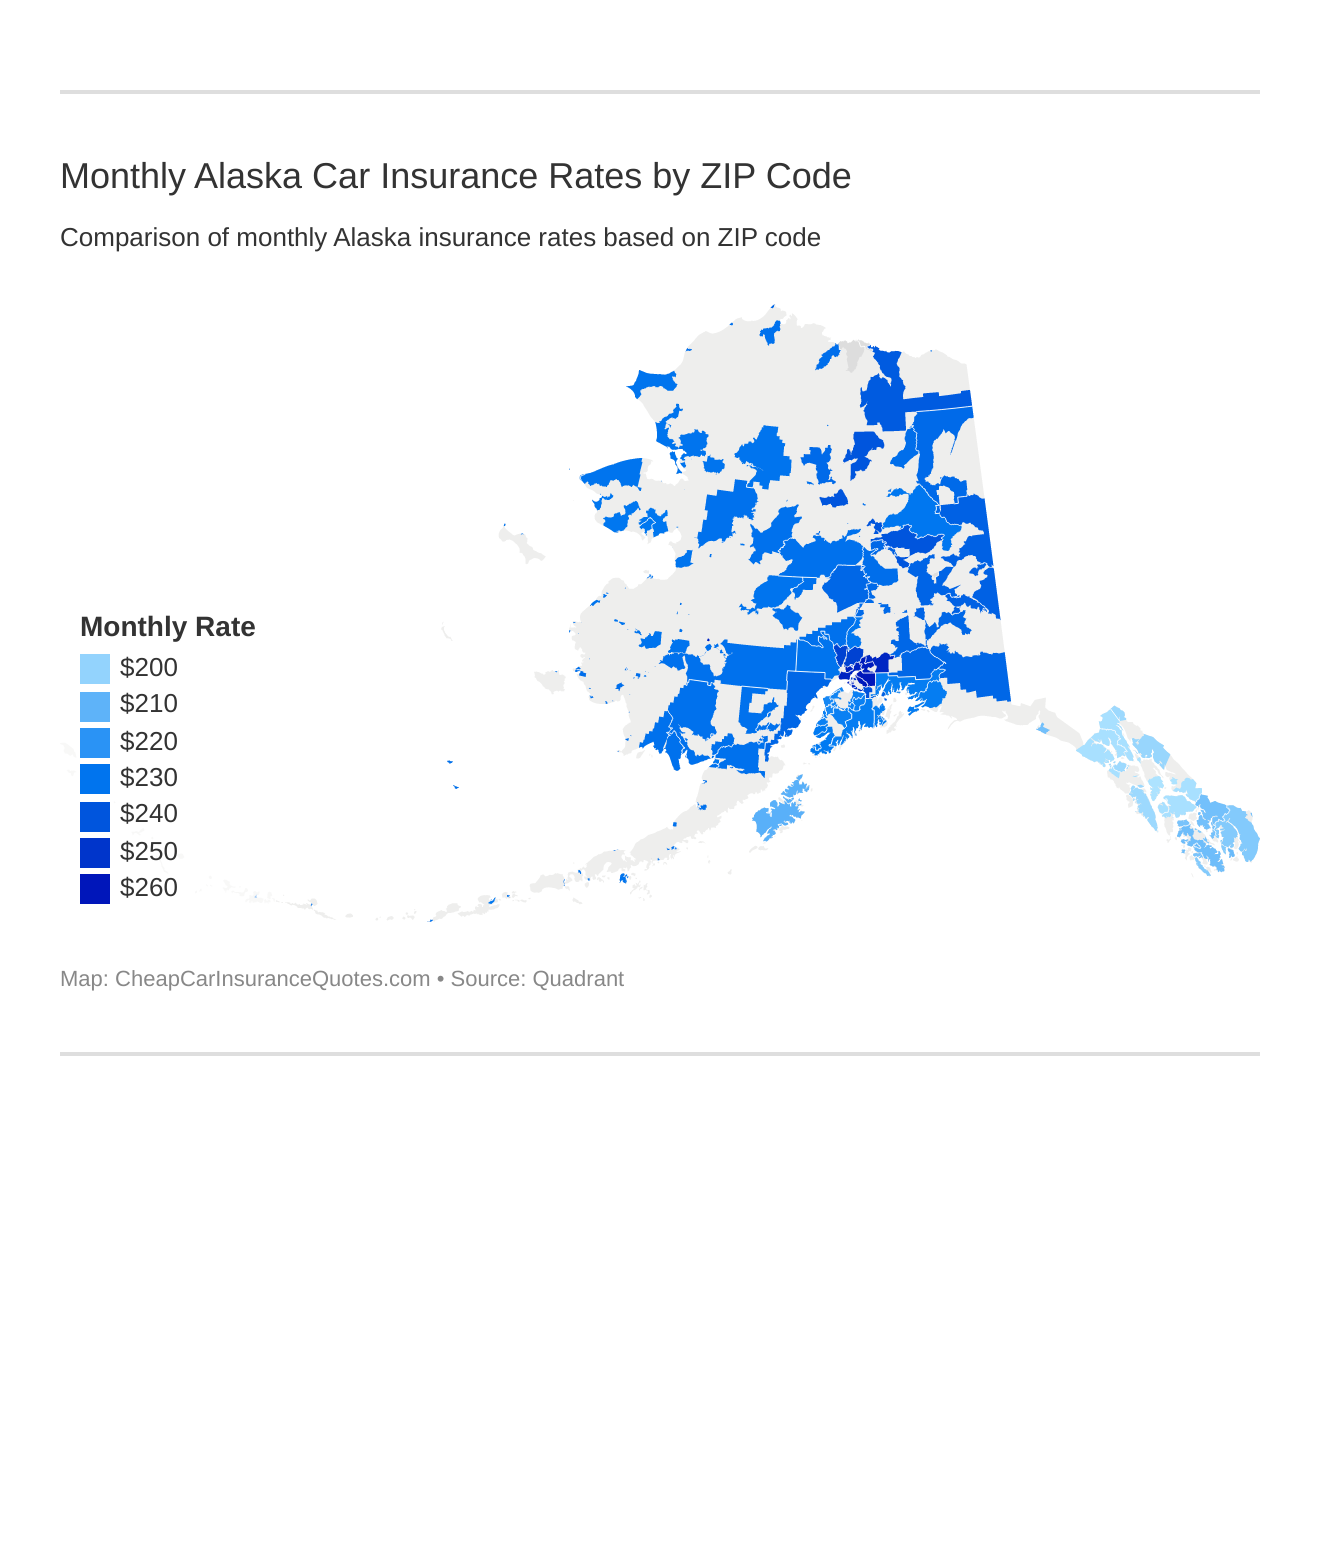 Monthly Alaska Car Insurance Rates by ZIP Code